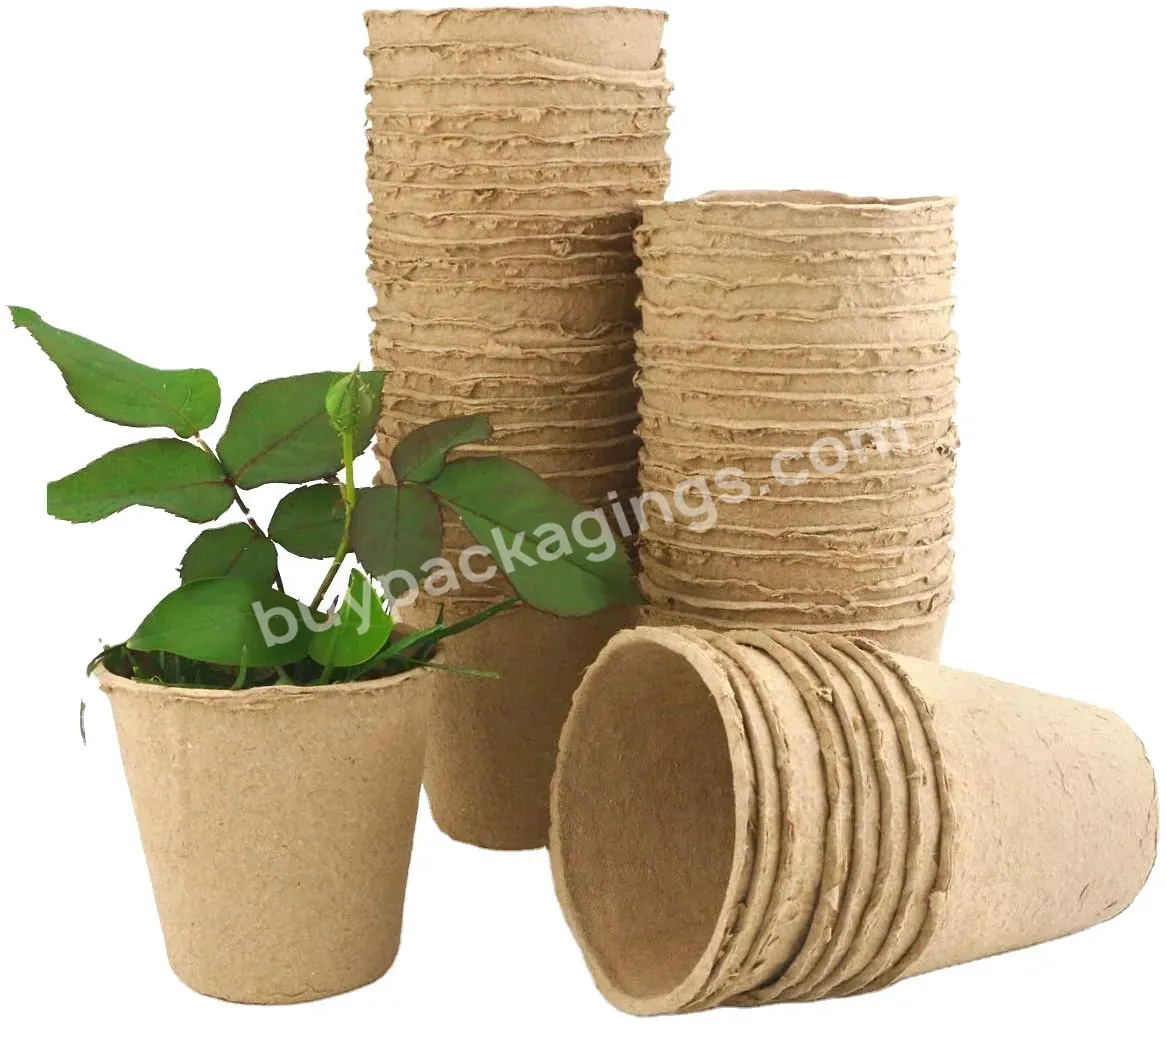 Customized Cheap Peat Pots For Seedlings Gardening Seed Starter Tray Biodegradable And Compostable Manufacturer Pot Seeds - Buy Seeding Pot,Garden Pot,Plants Pot.